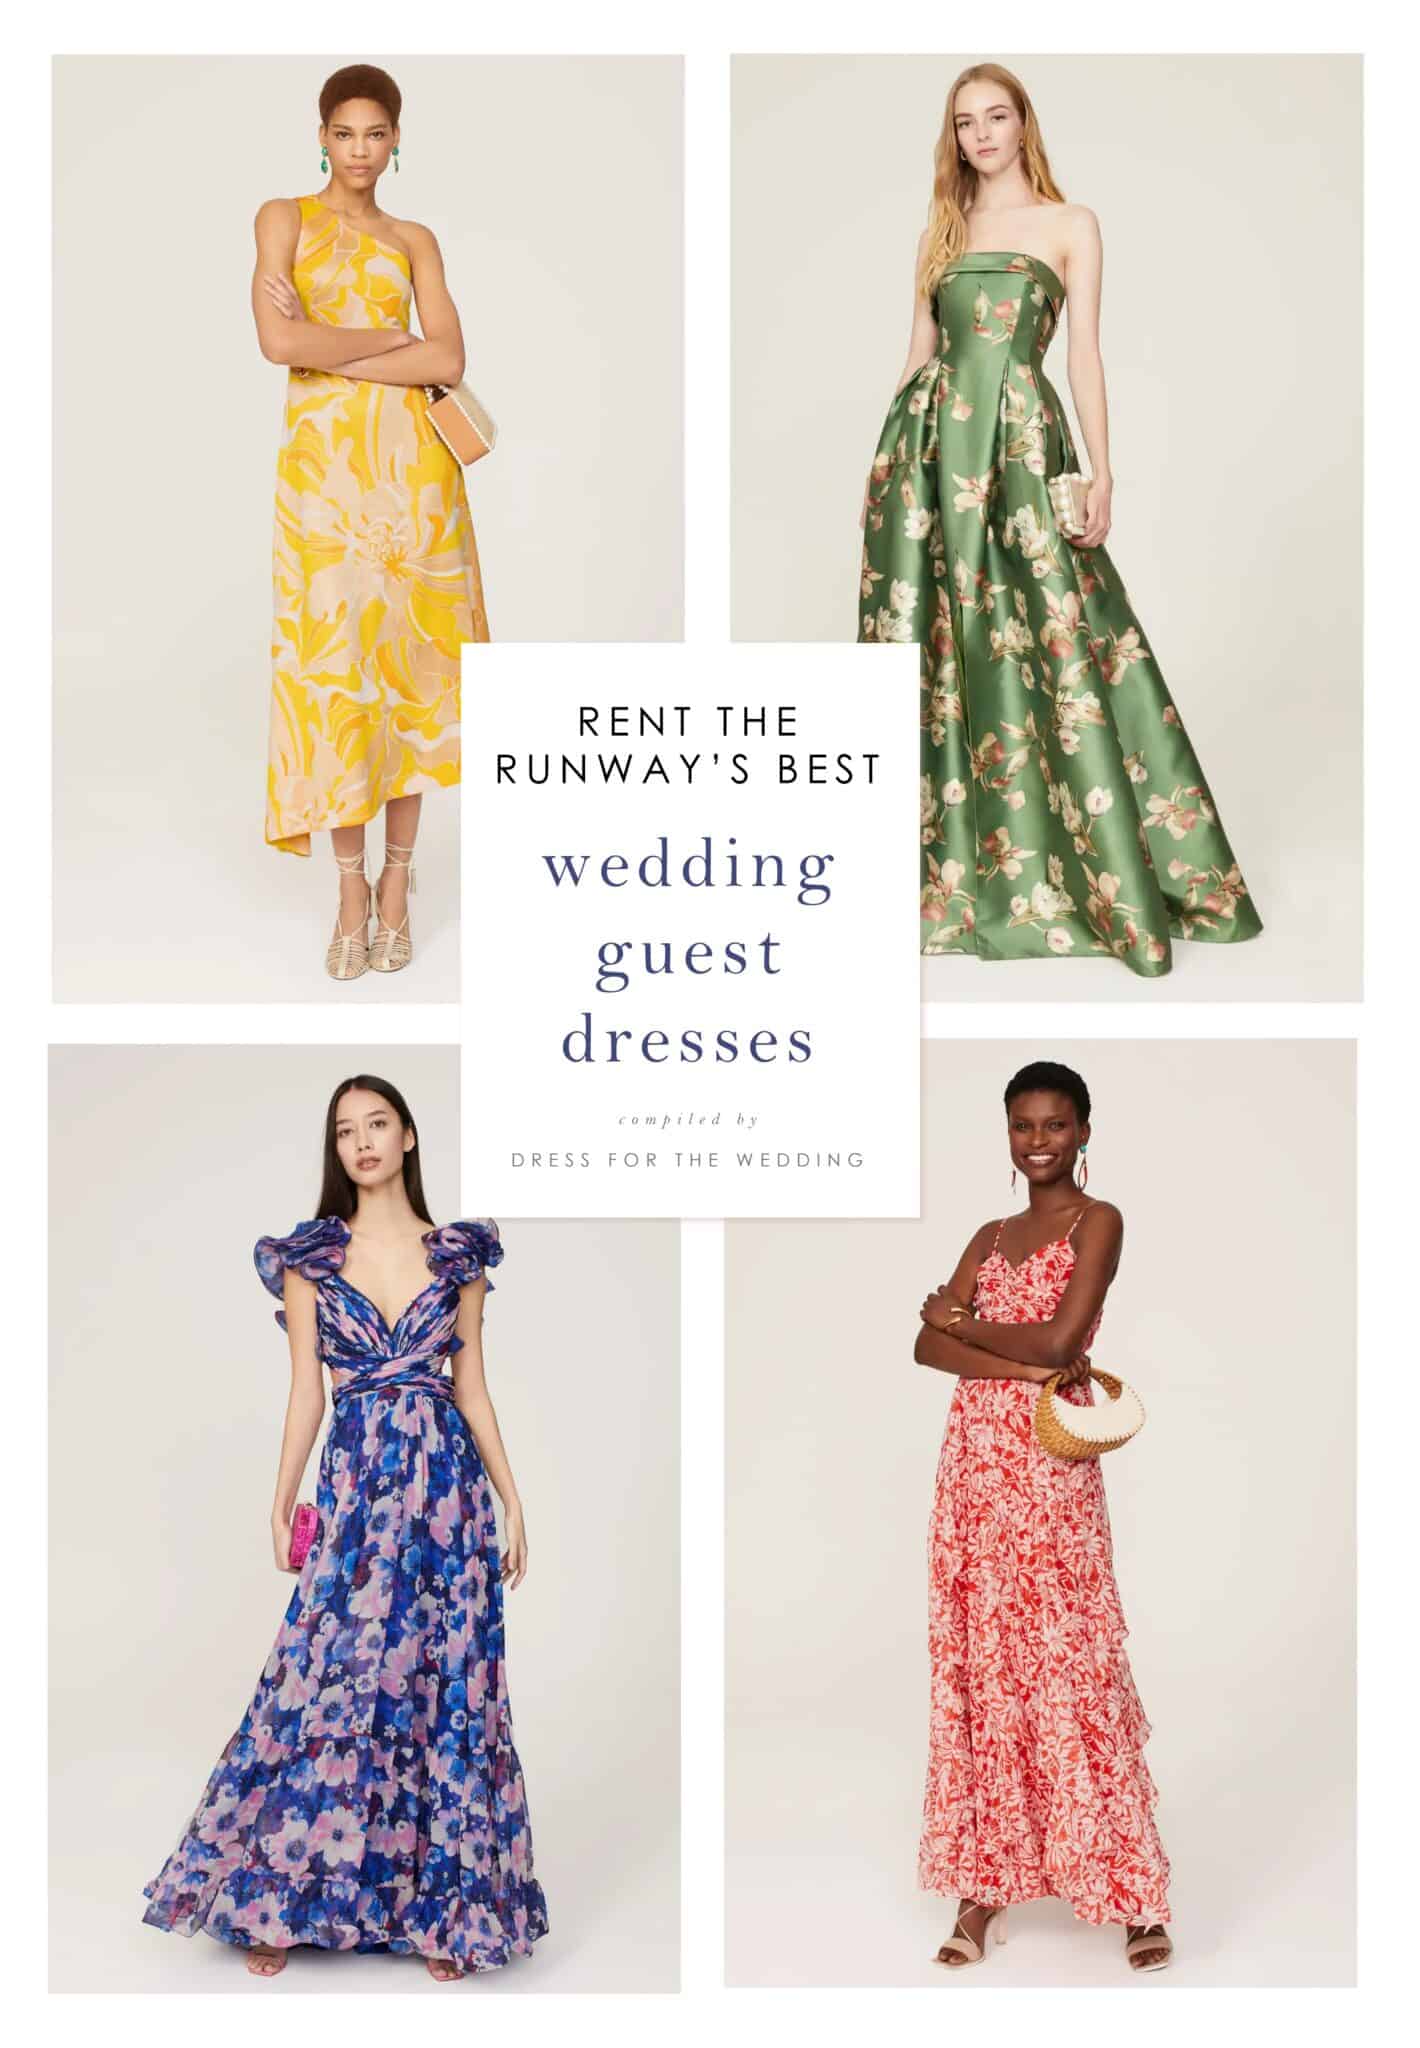 The Best Dresses to Rent for a Wedding Guest - Dress for the Wedding